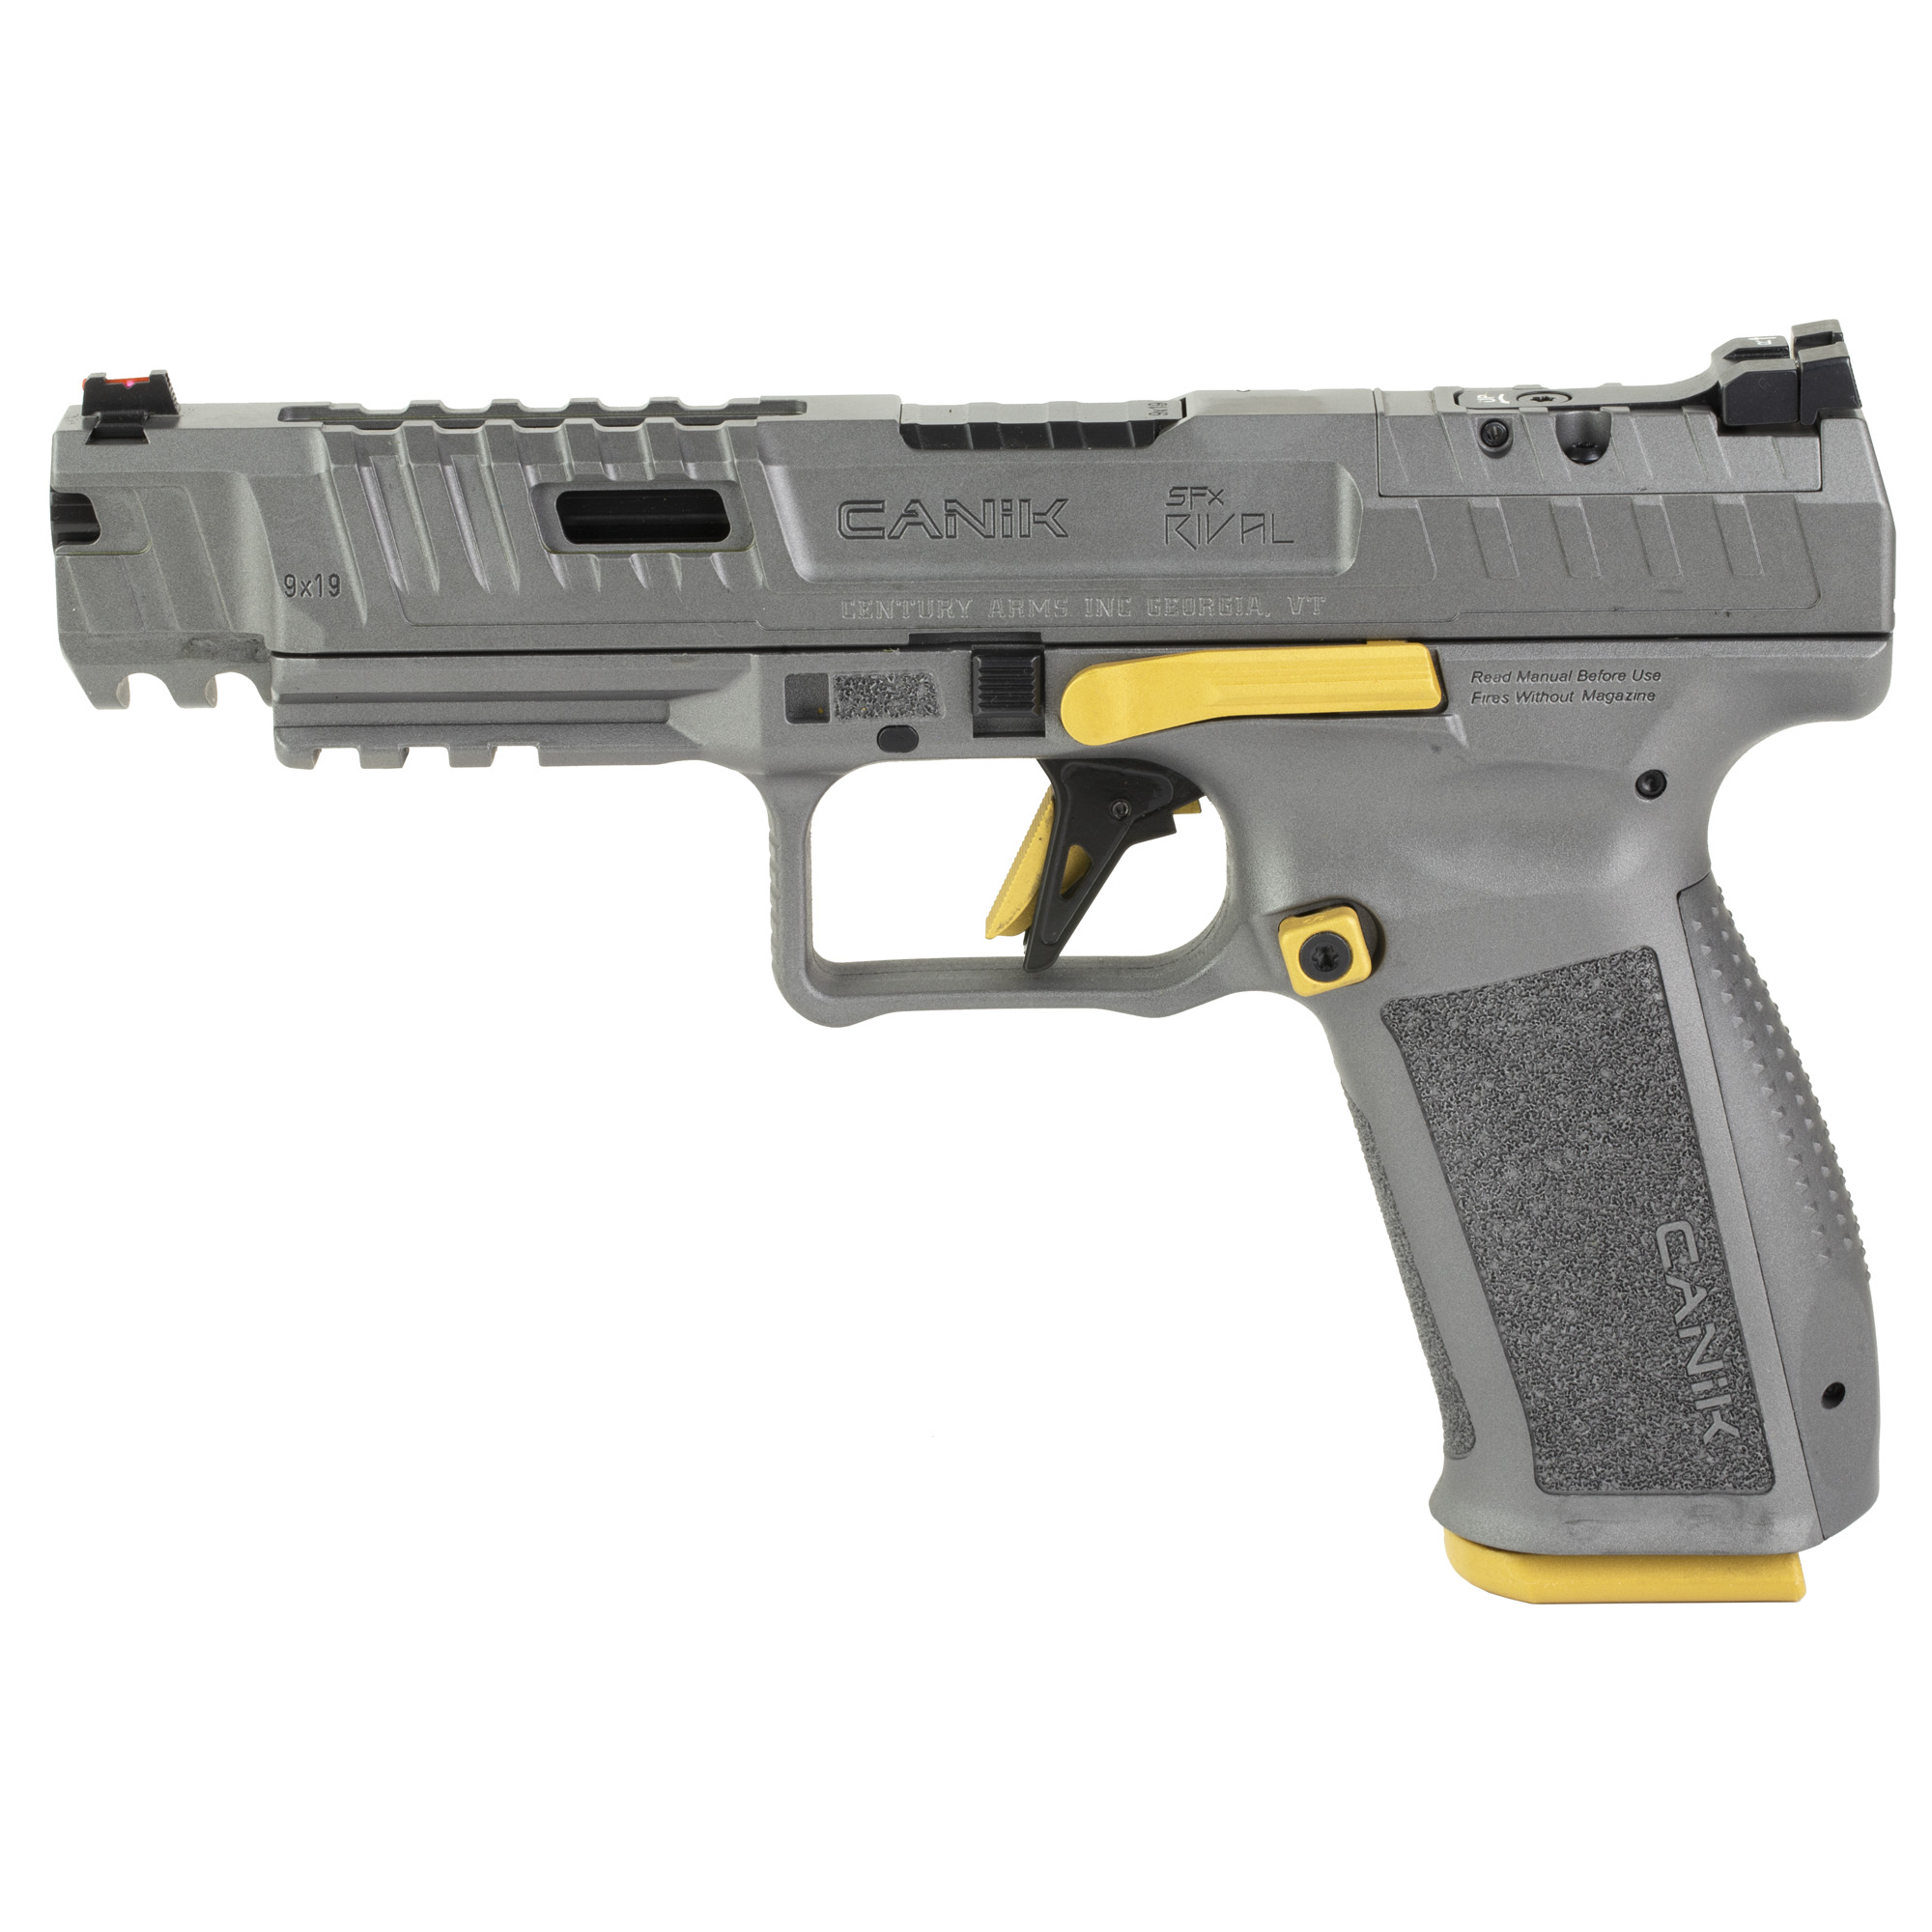 CANIK SFX RIVAL 9MM 5 2-18RD GRY